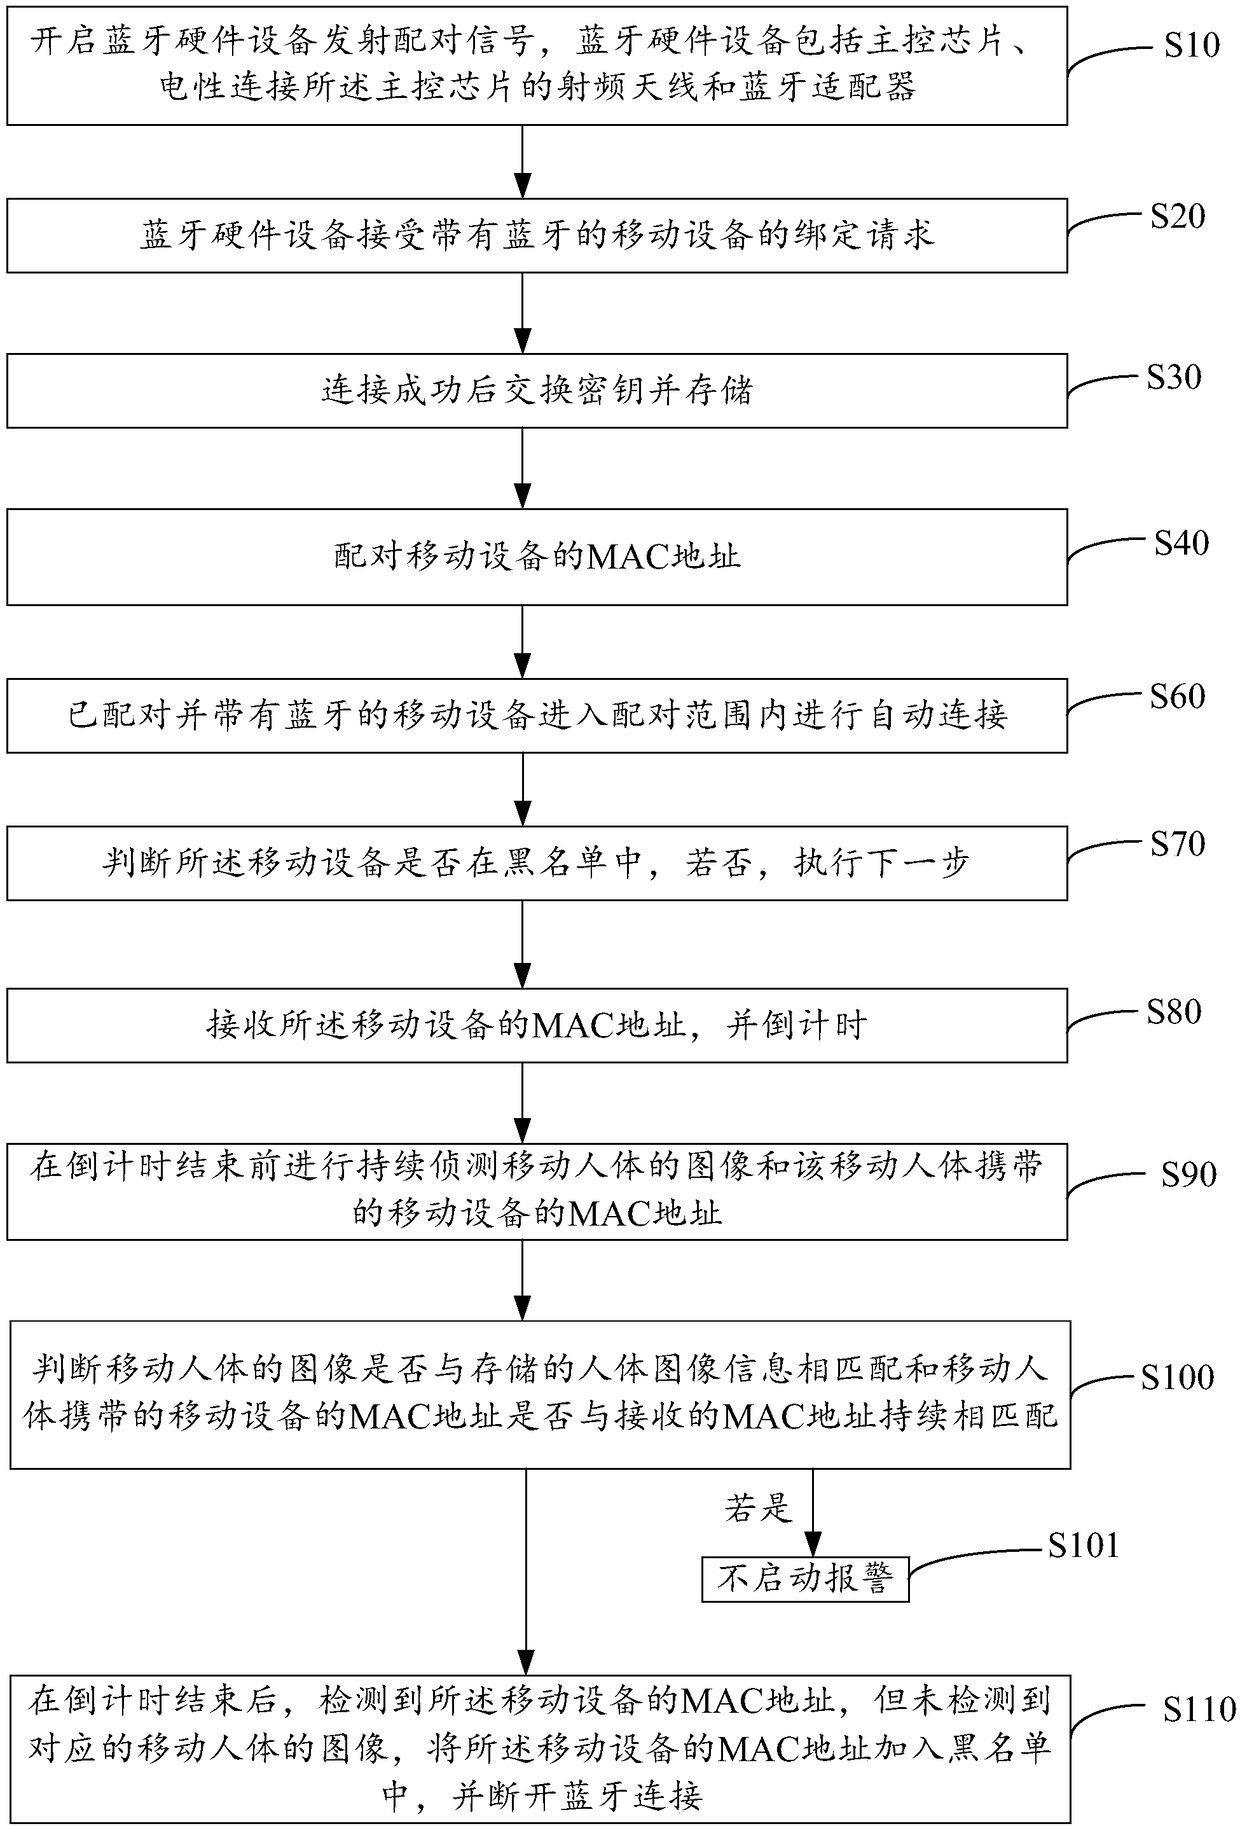 Security and protection identity recognition method and system, and computer readable storage medium